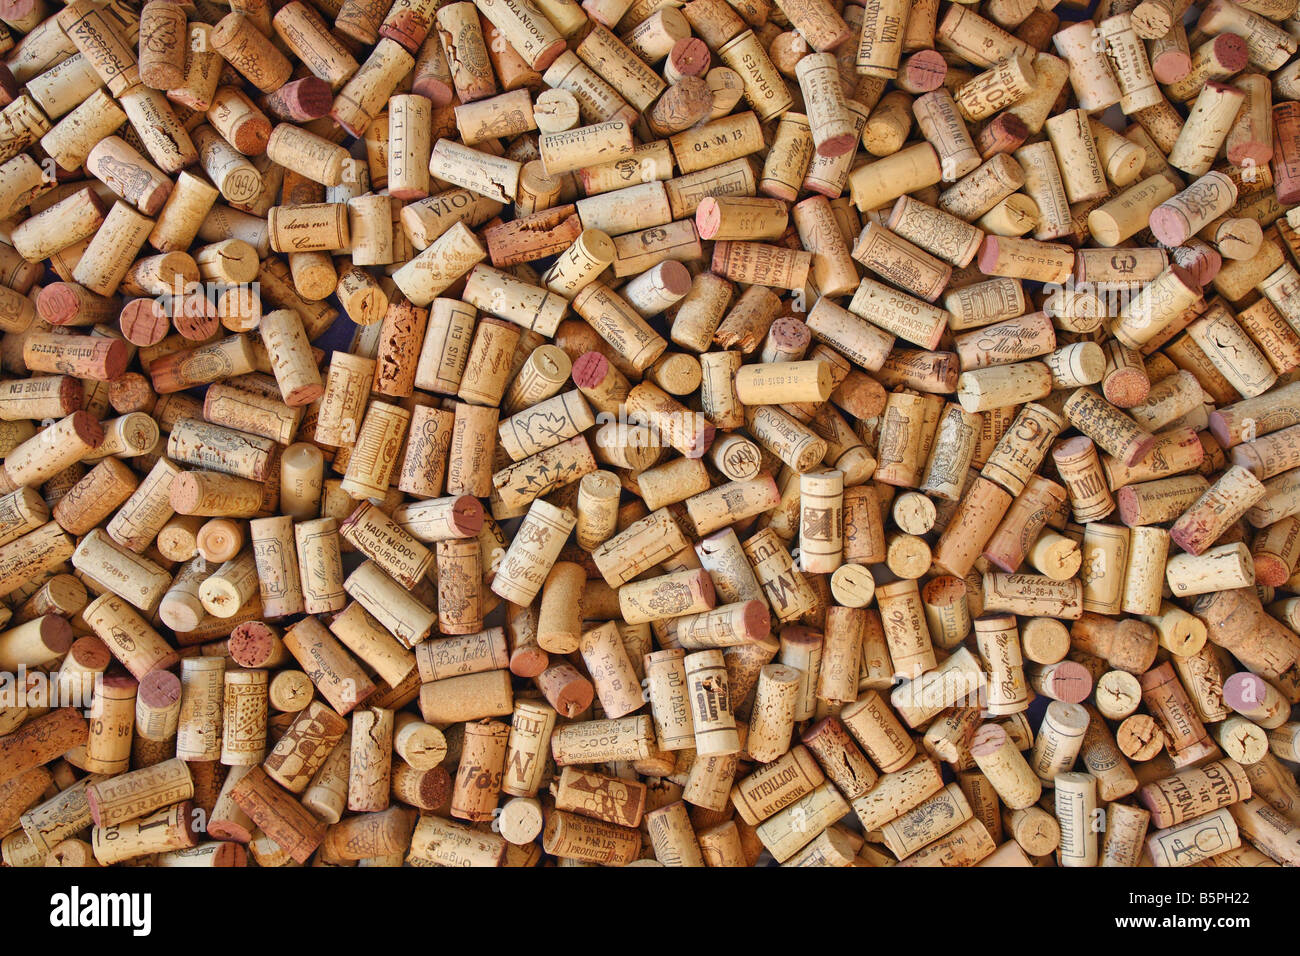 Wine cork stoppers Stock Photo